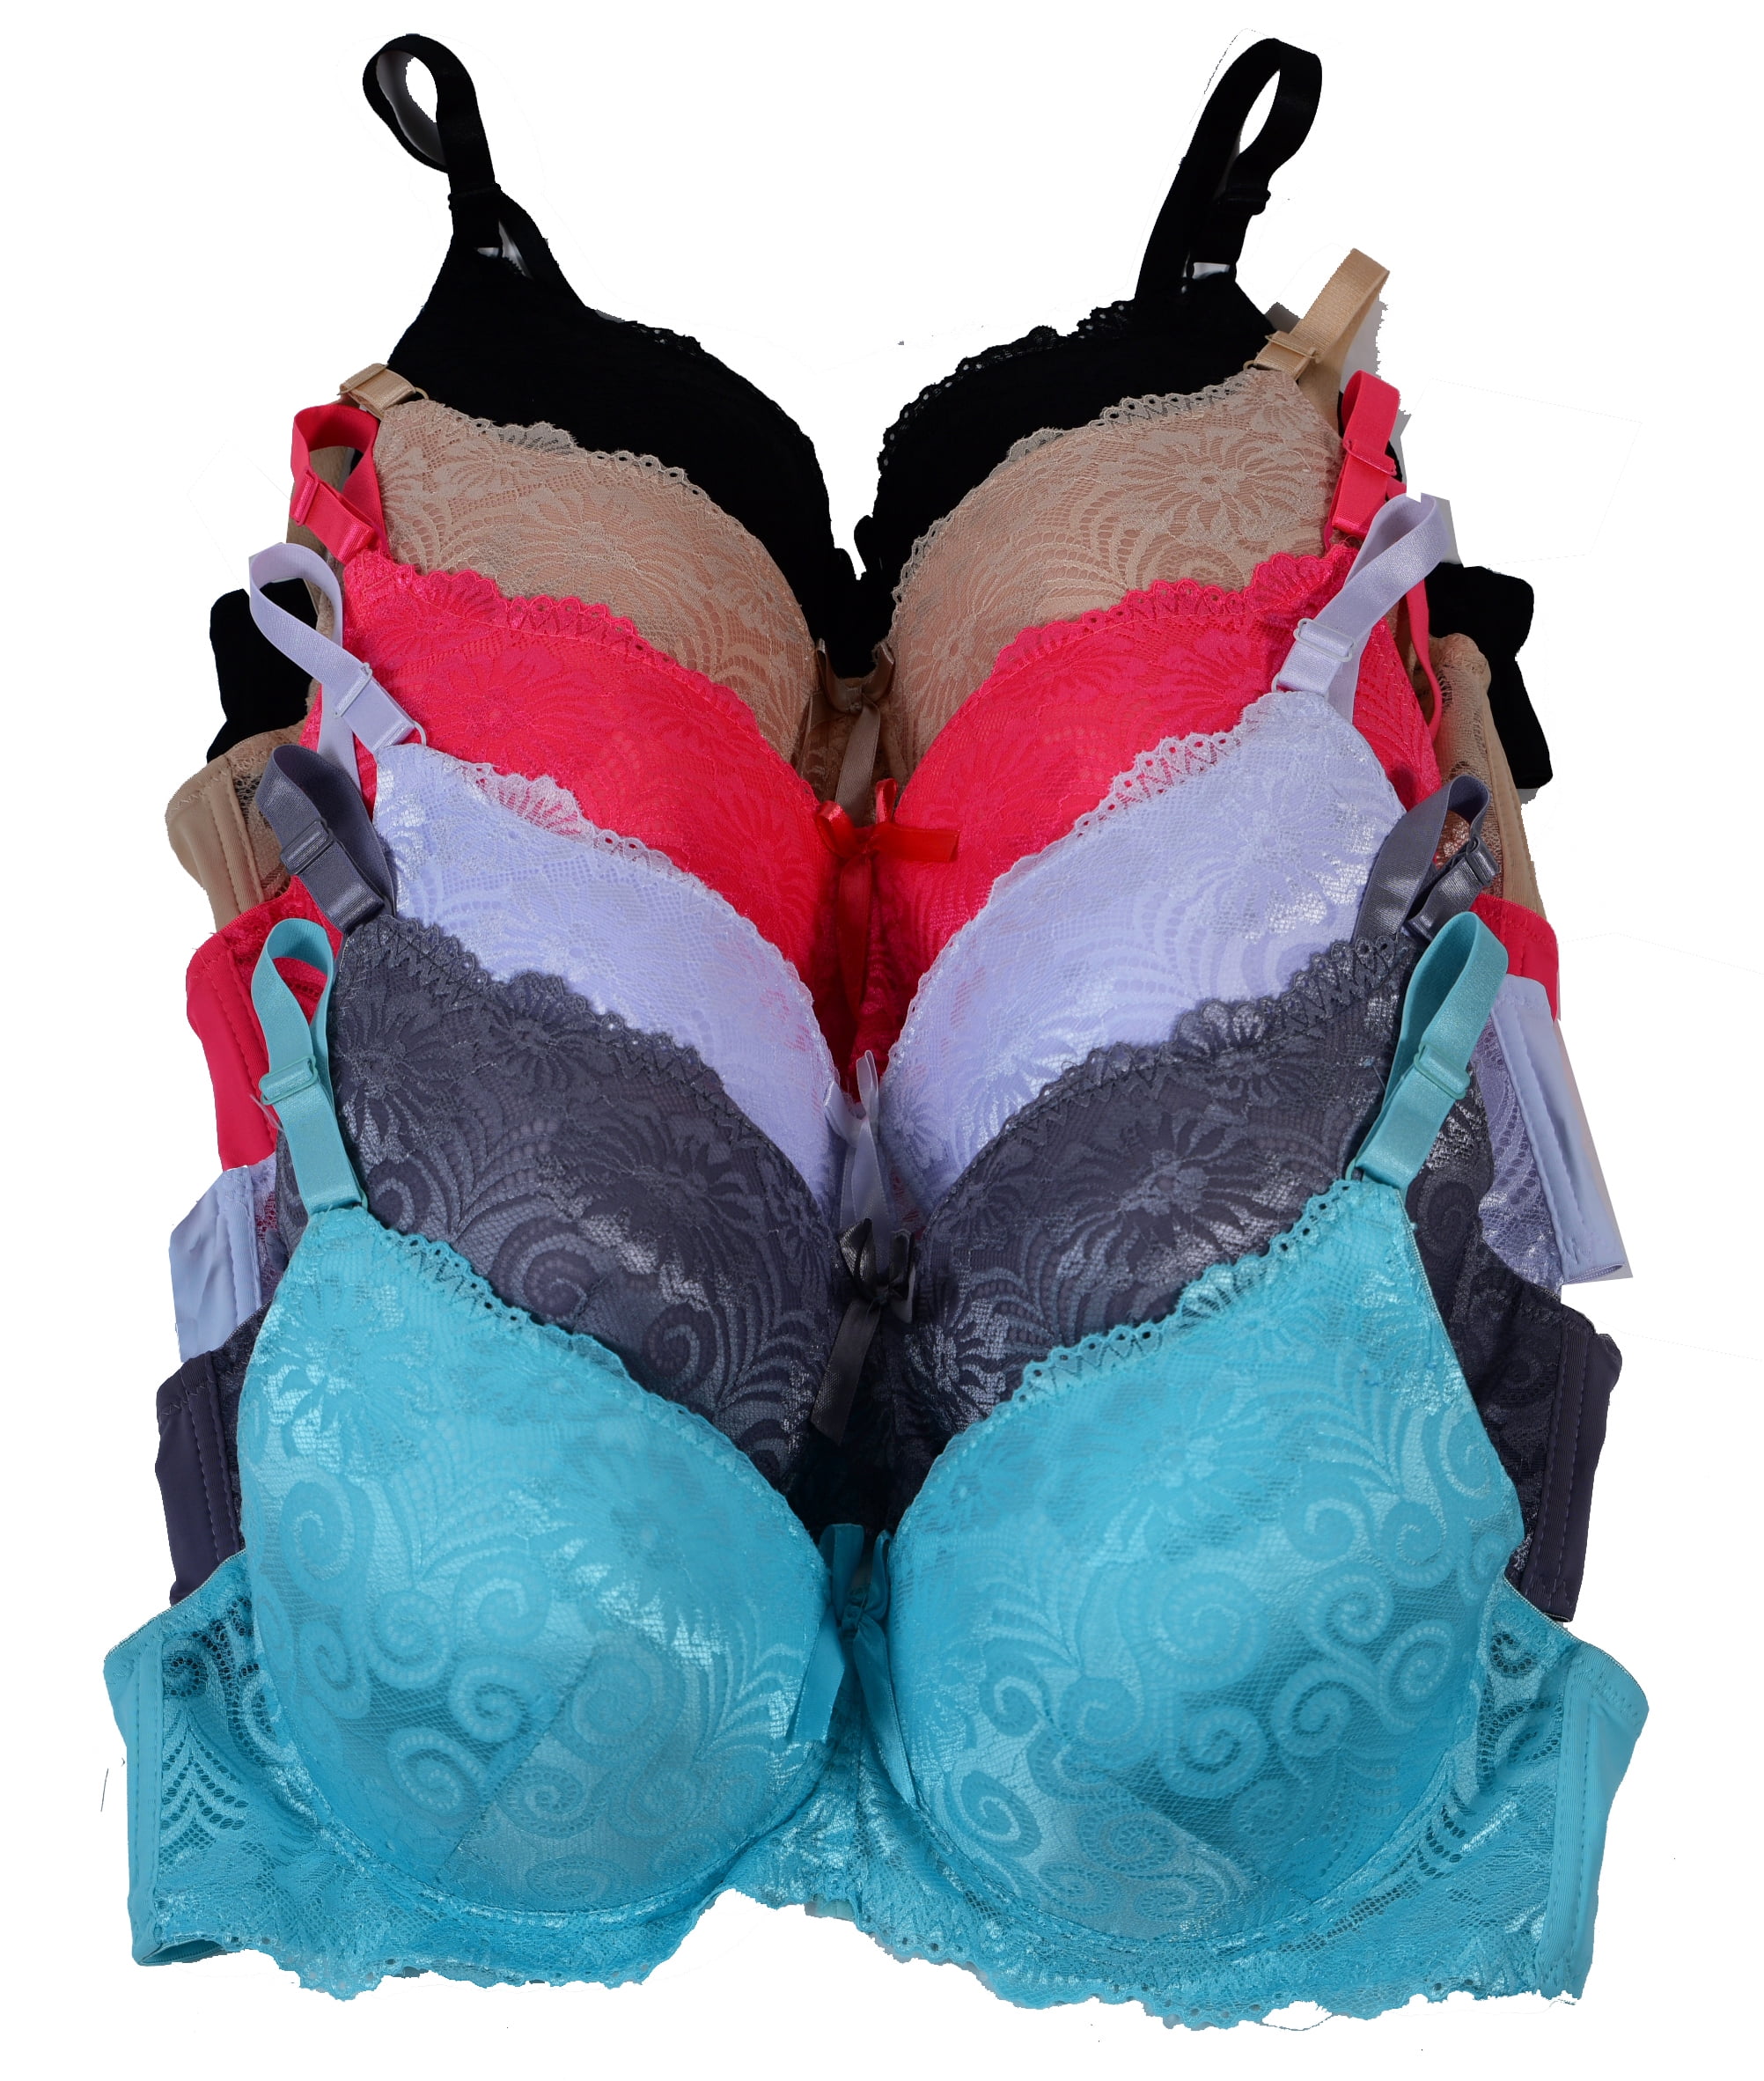 Women Bras 6 pack of Bra with all lace D DD cup, Size 40D (6304)